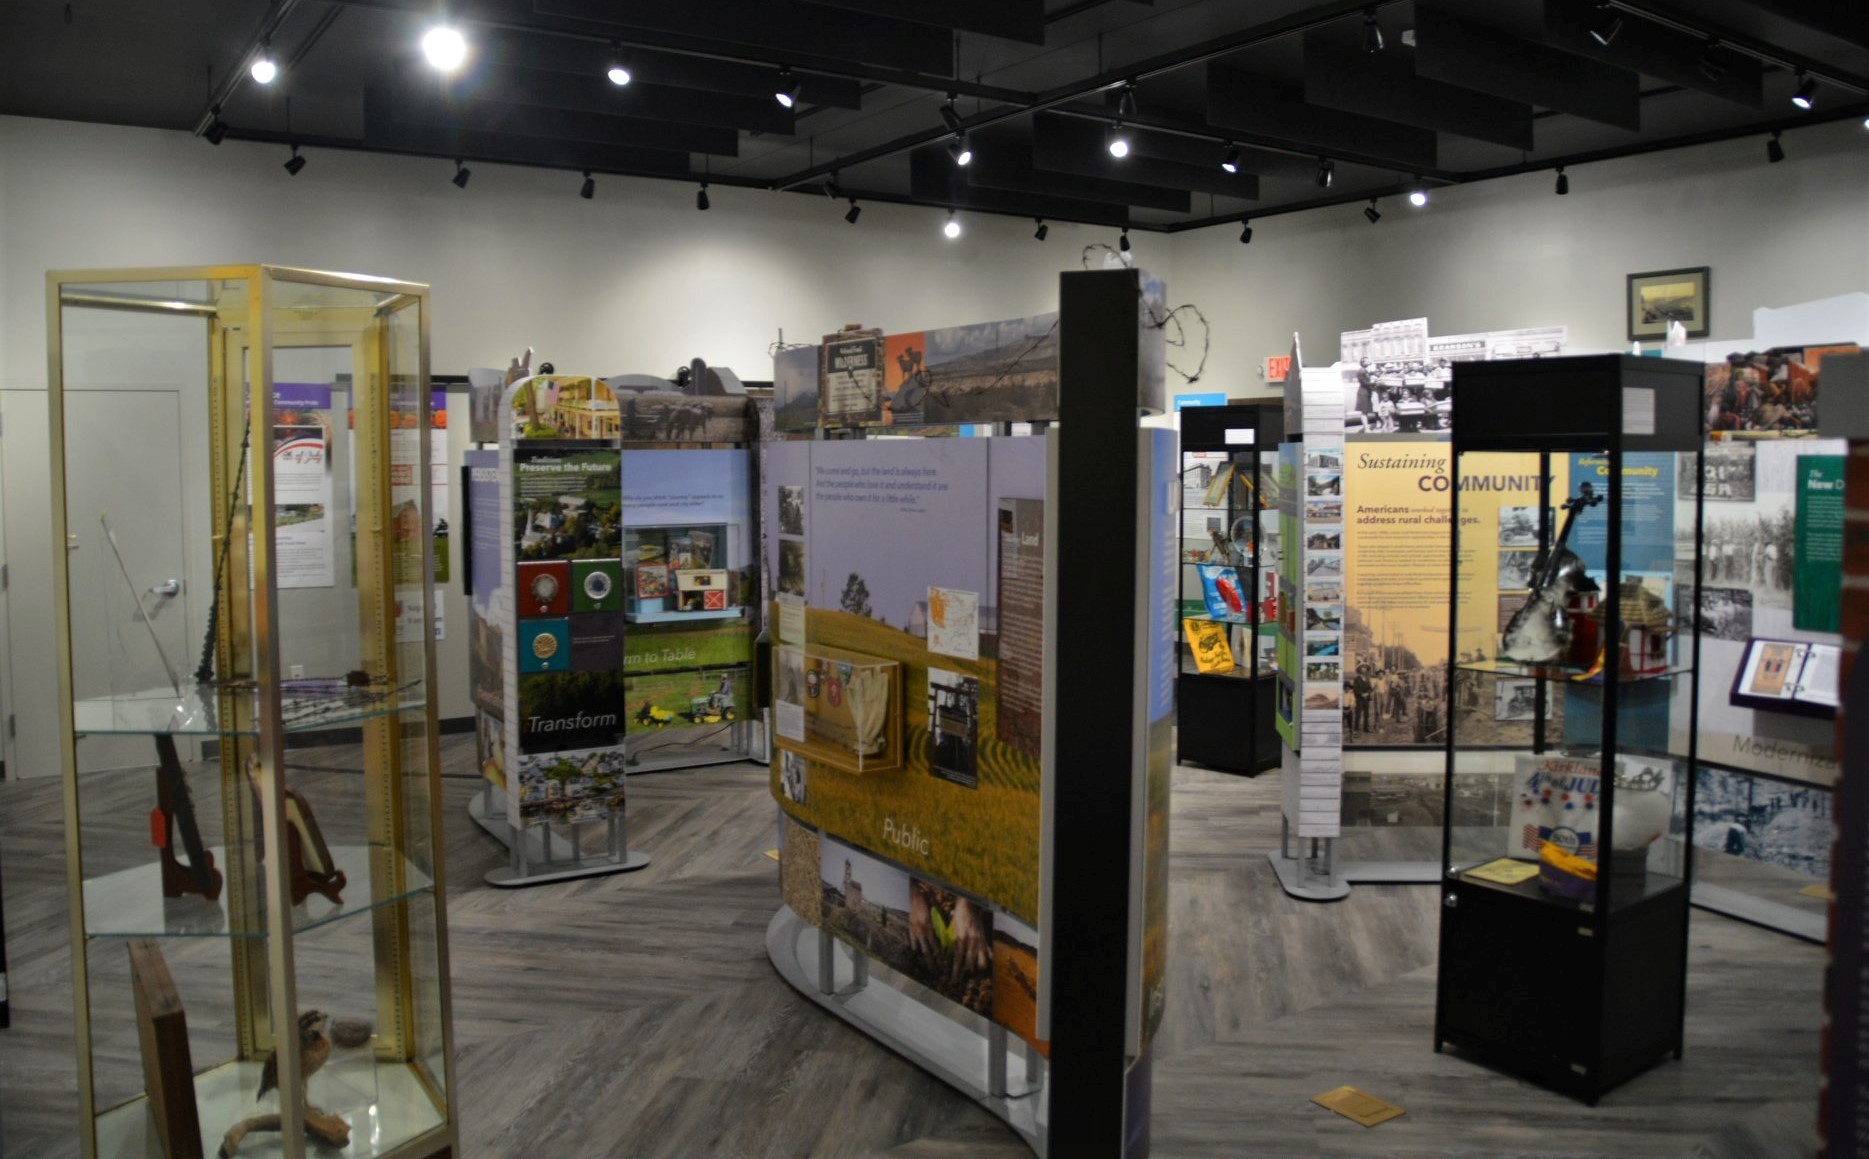 Photograph of Crossroads and companion exhibition segments at DeKalb County History Center.